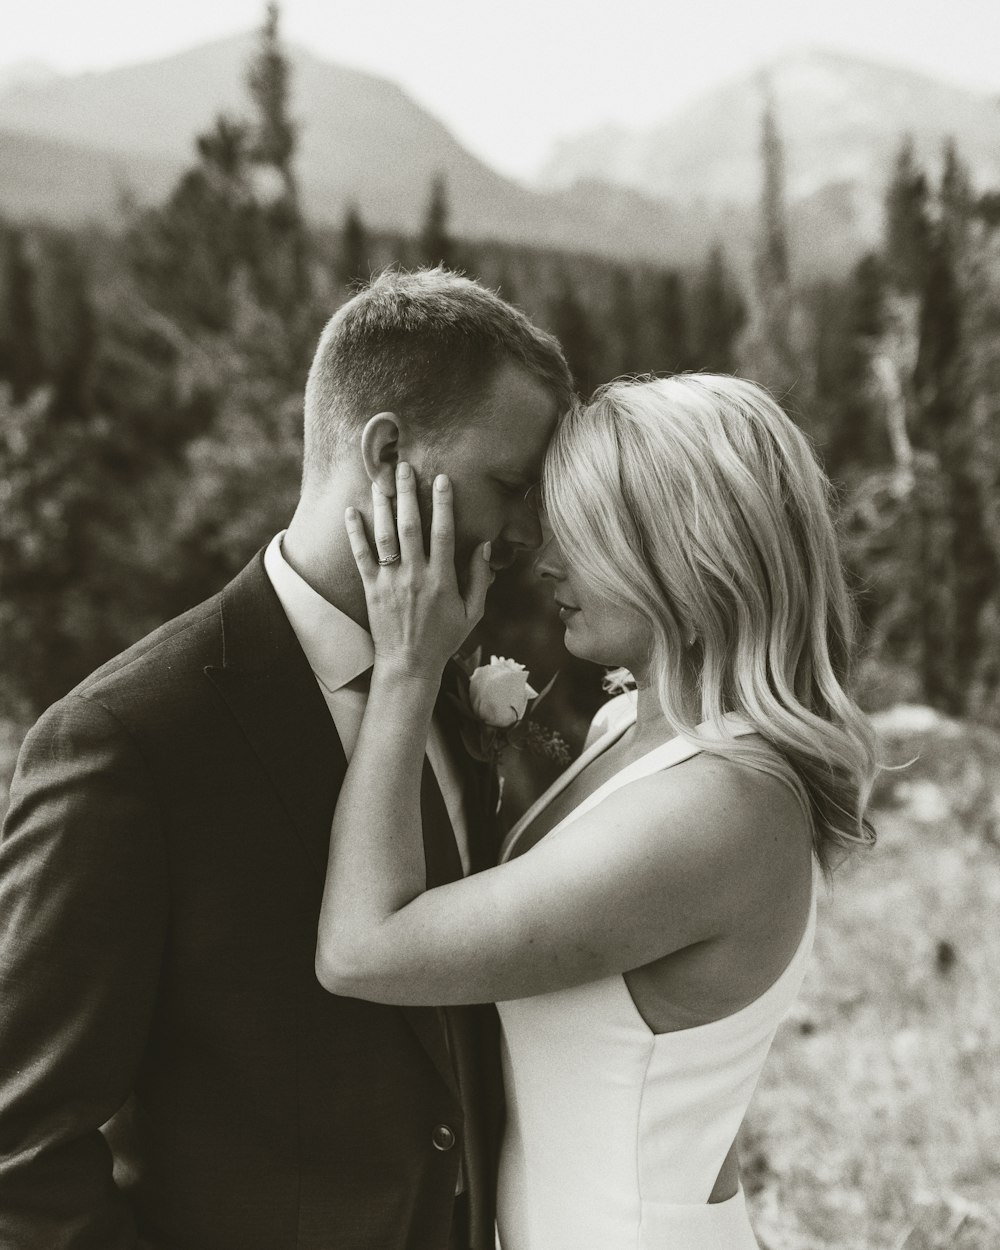 man and woman kissing in grayscale photography